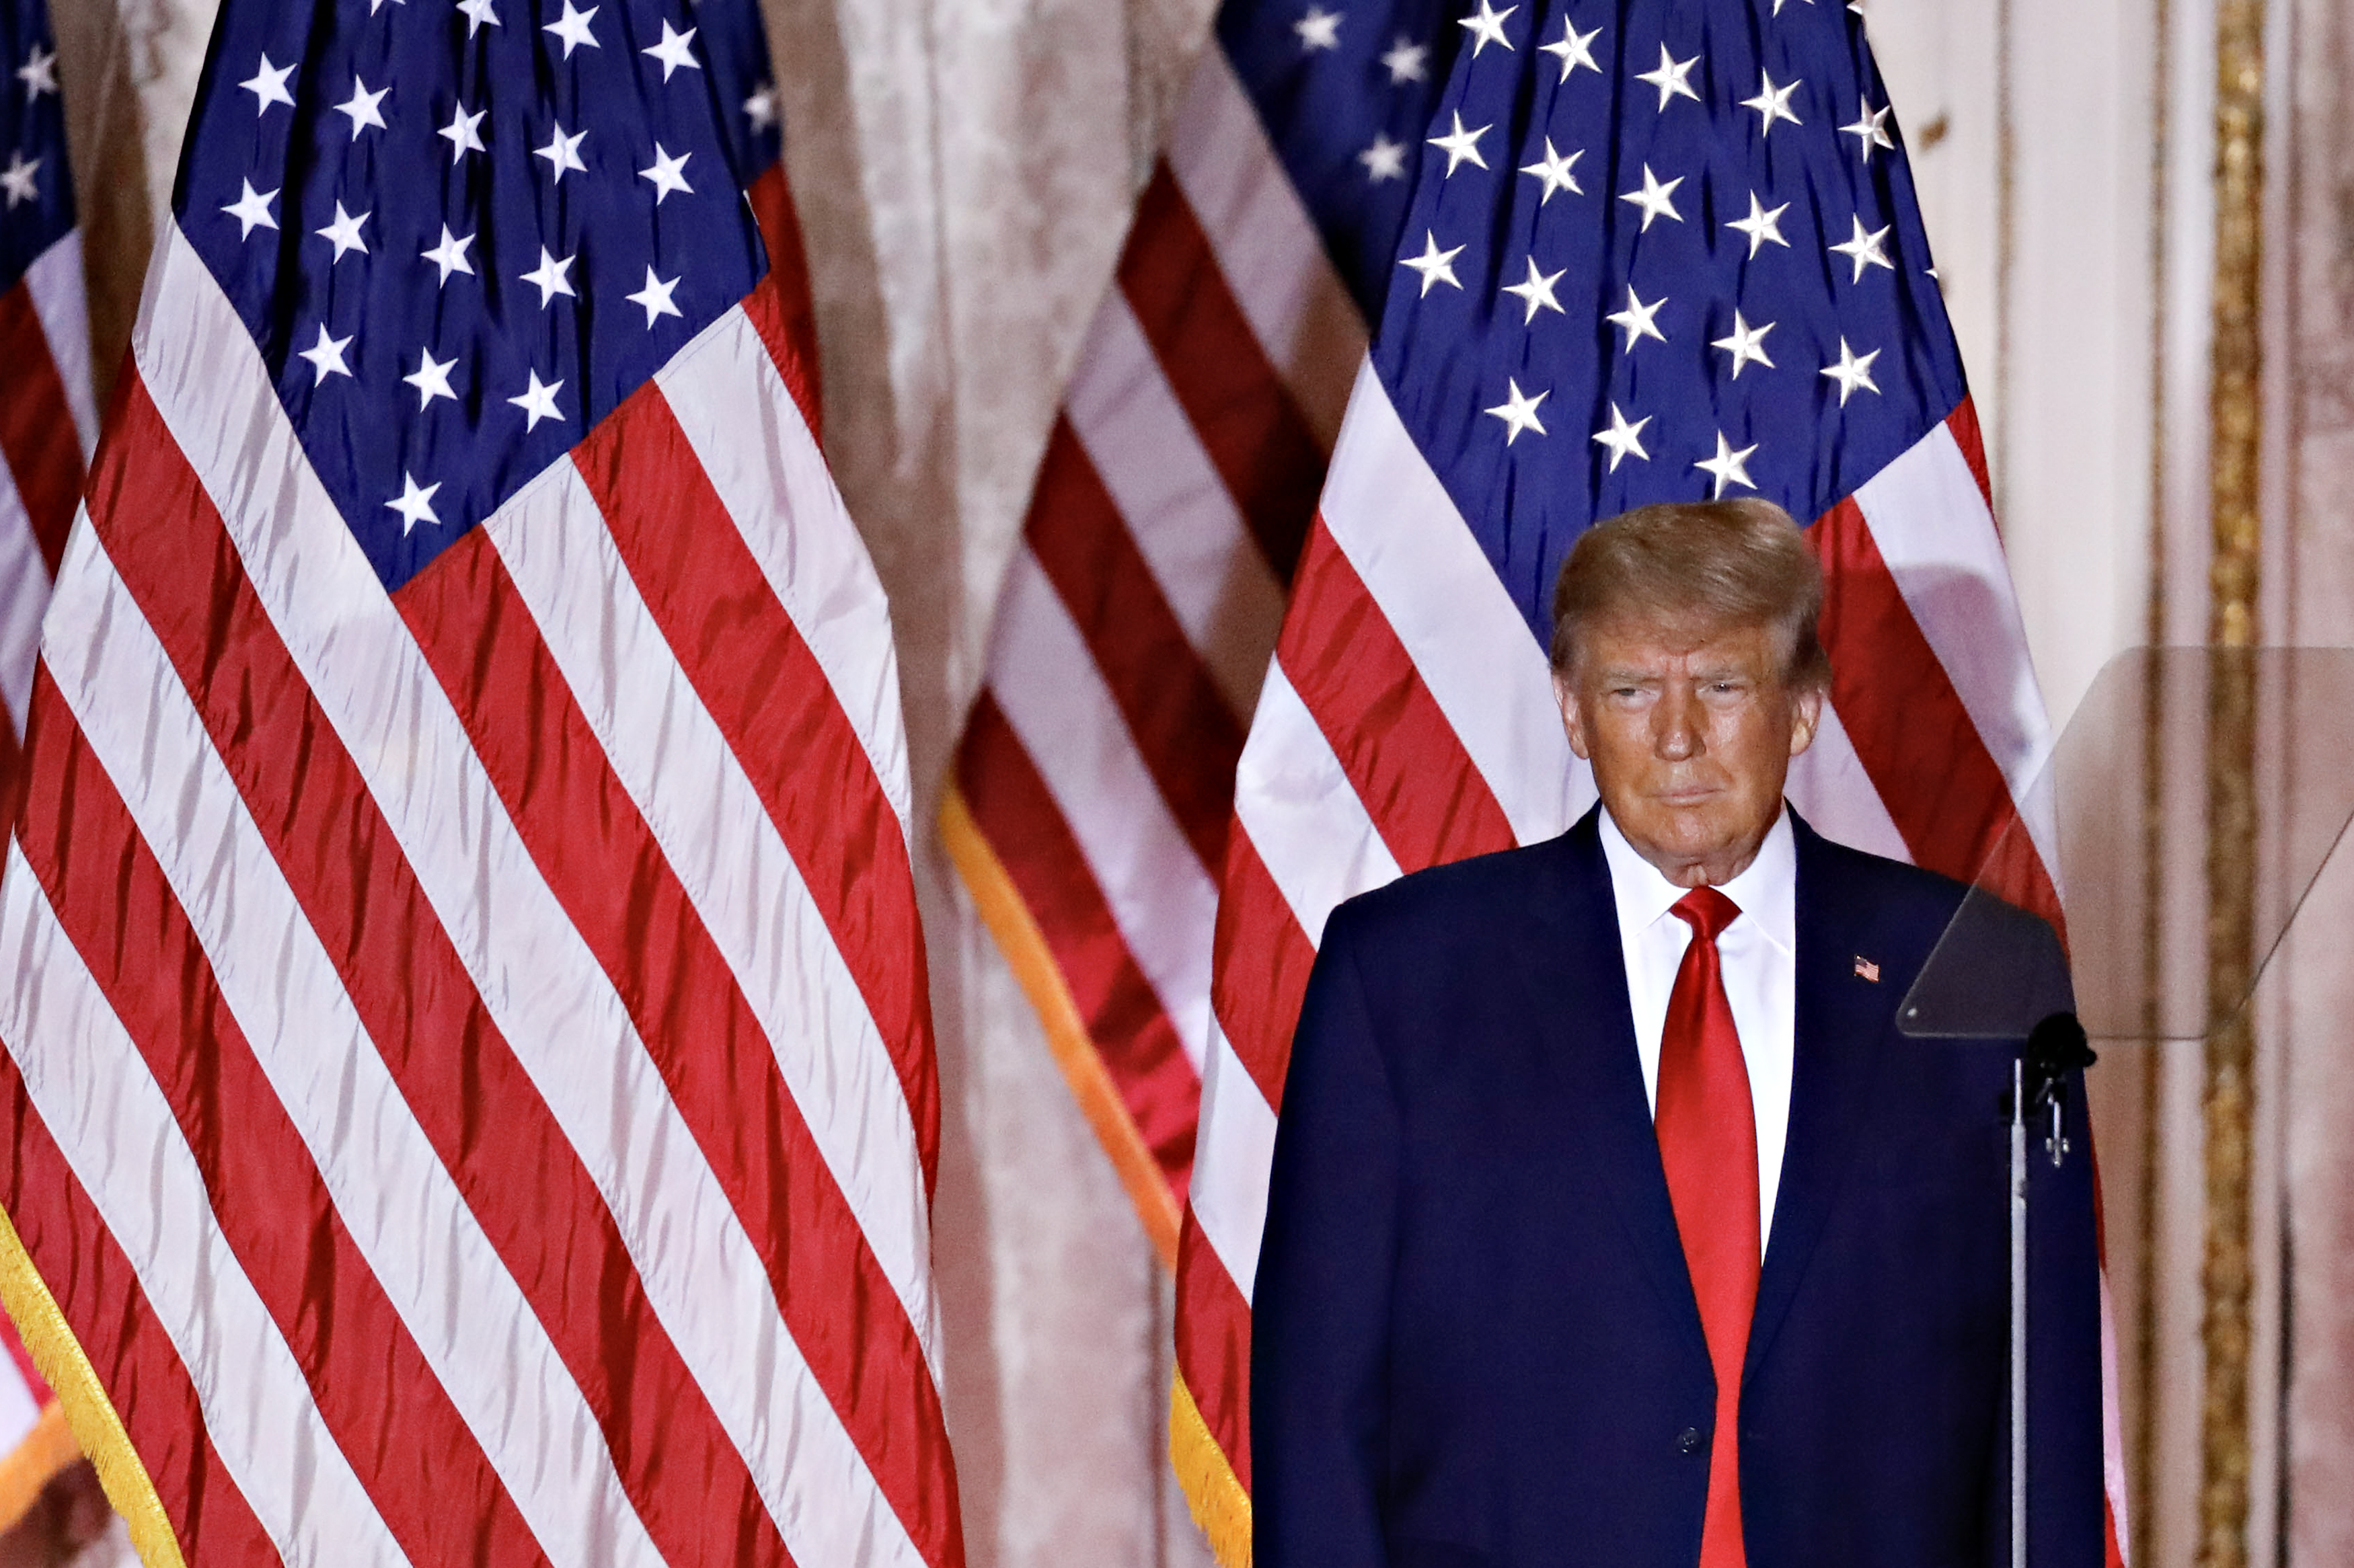 Donald Trump standing onstage in front of American flags.